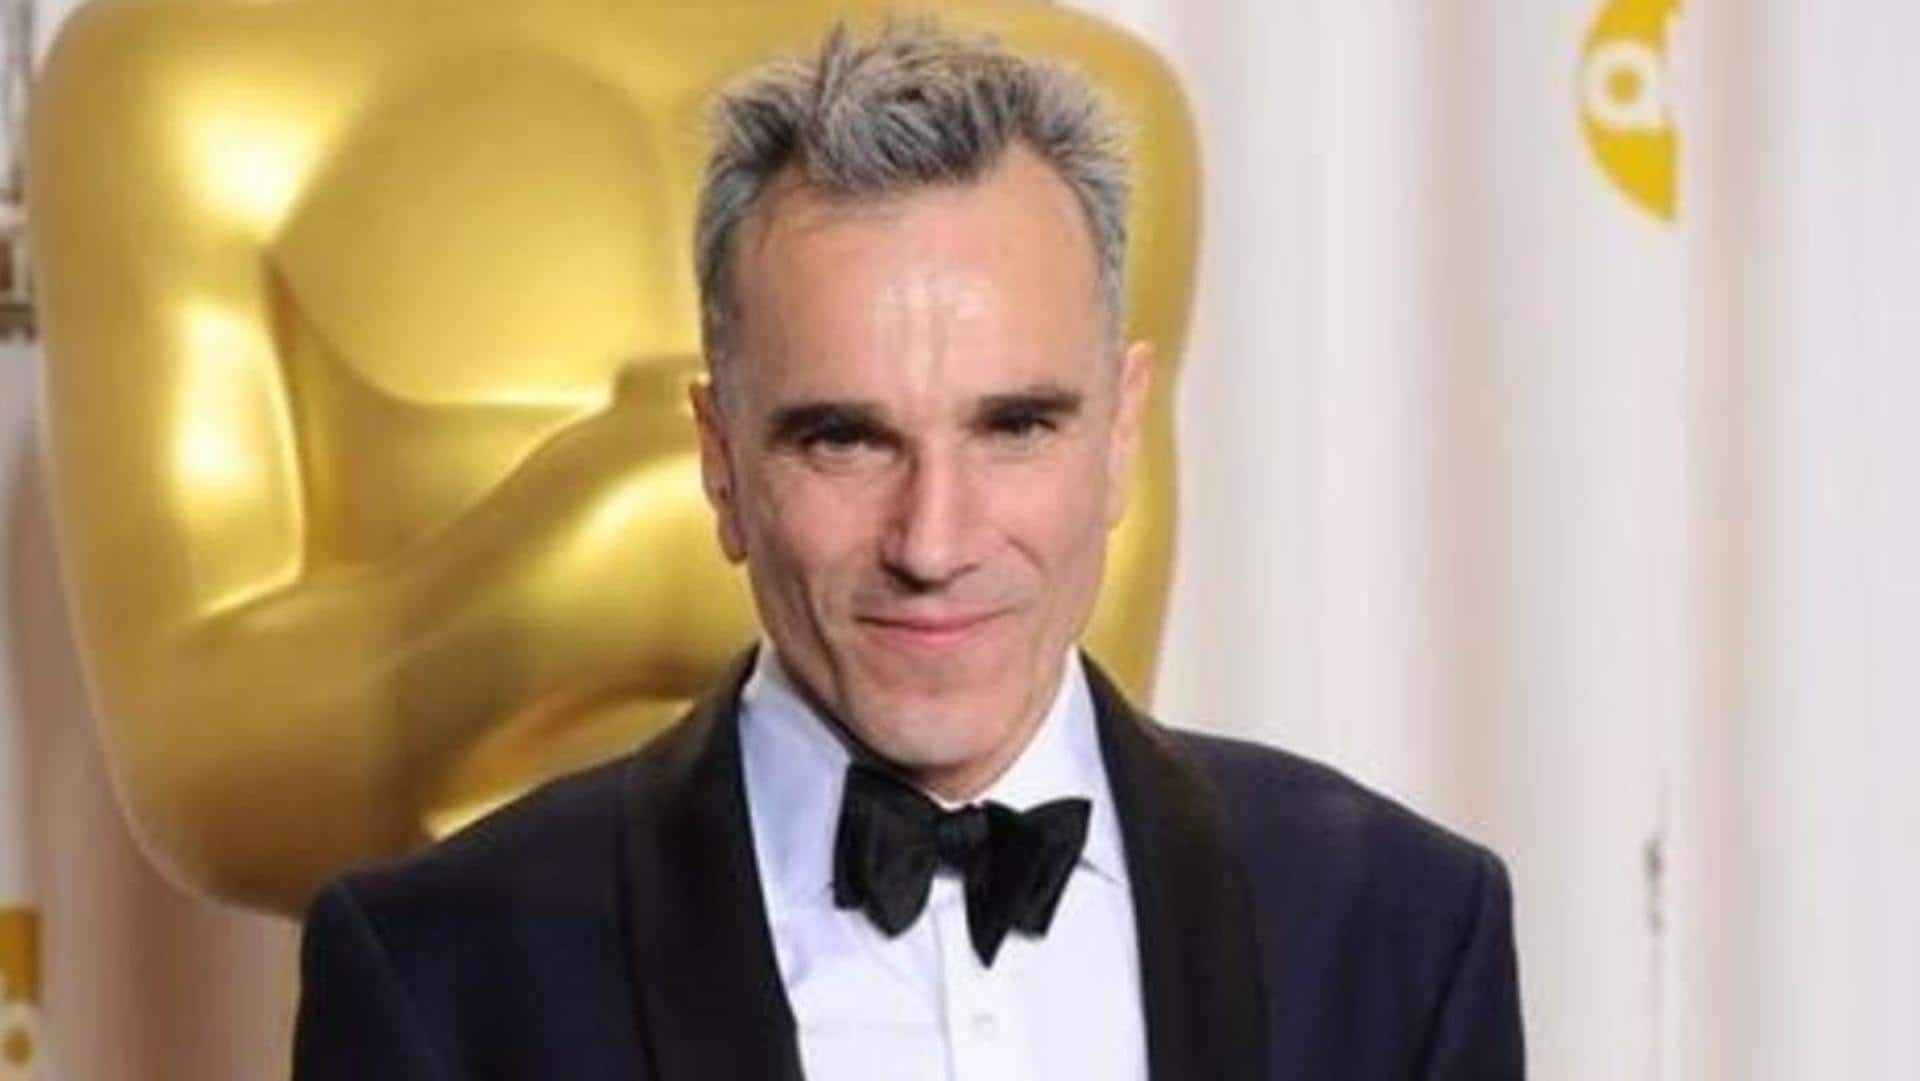 Happy birthday, Daniel Day-Lewis: 5 greatest films of all time